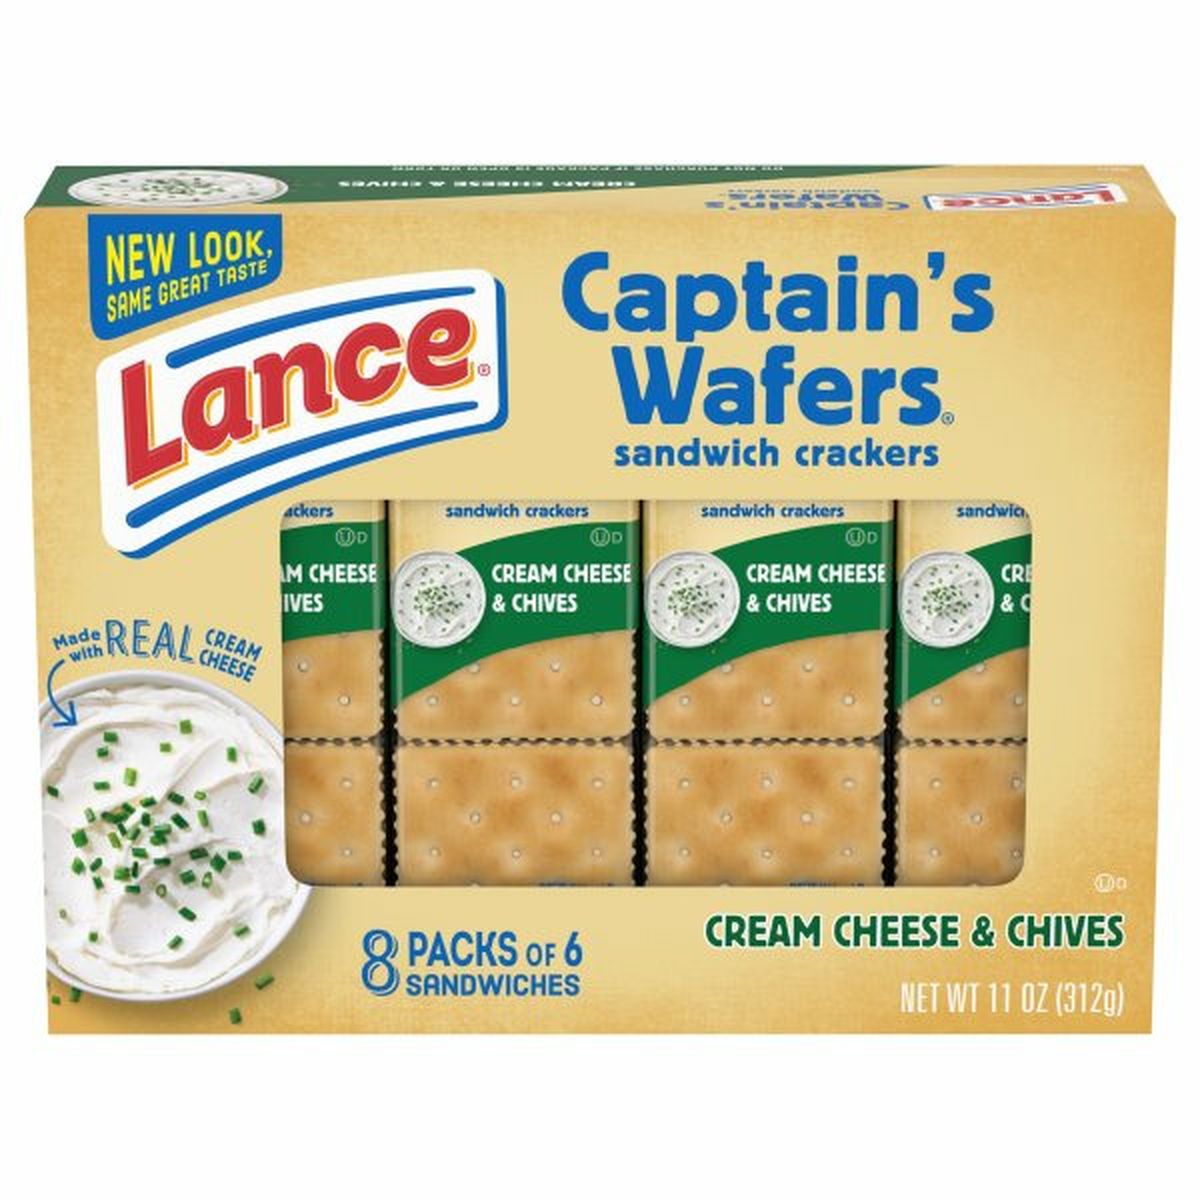 Calories in Lances Captain's Wafers Sandwich Crackers, Cream Cheese & Chives, 8 Packs